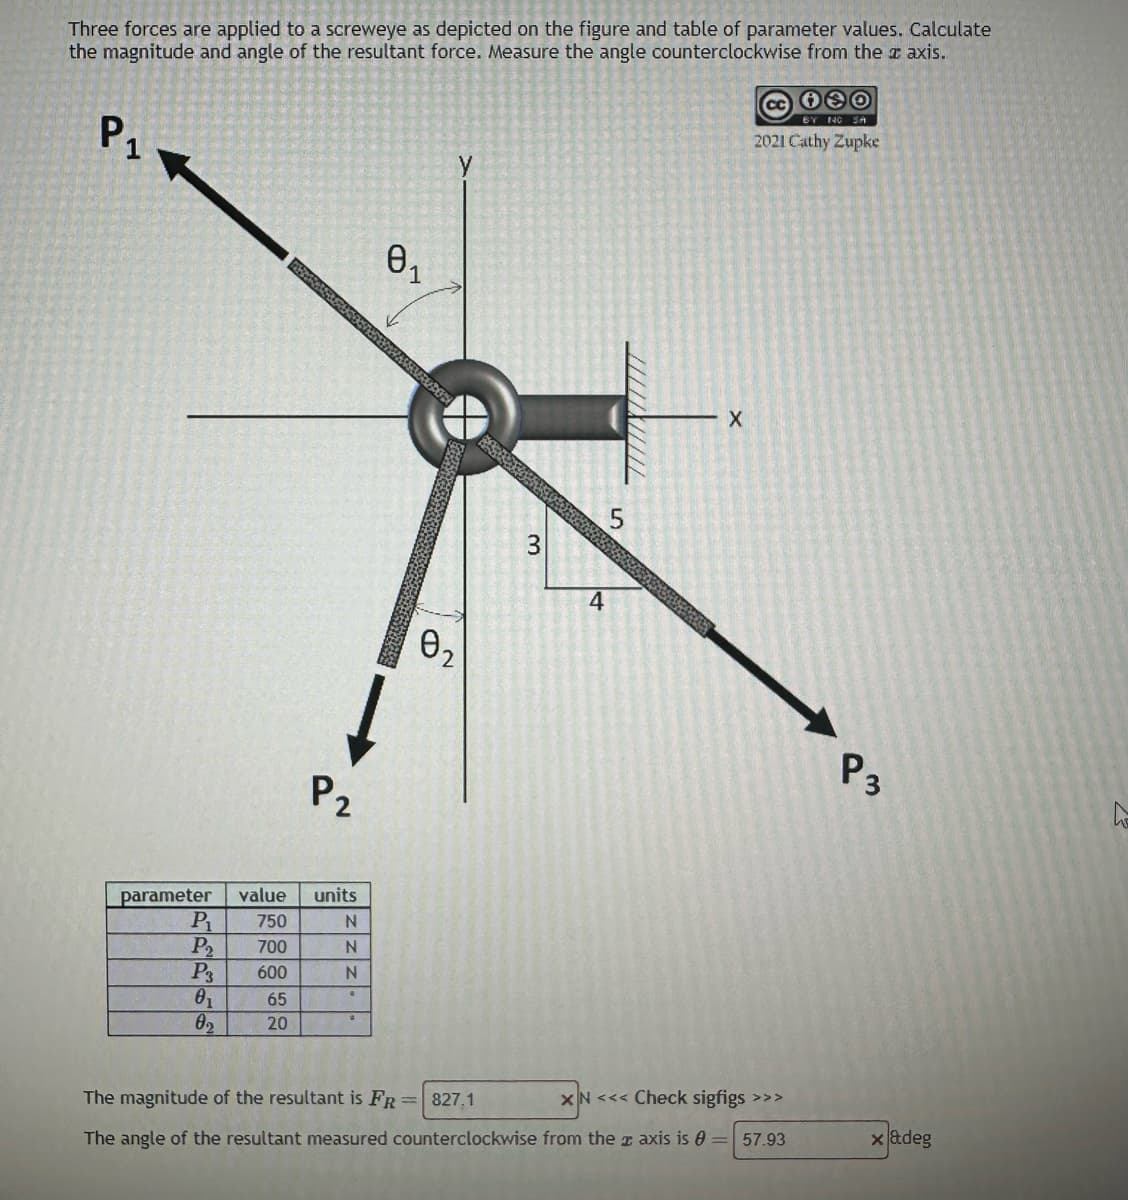 Three forces are applied to a screweye as depicted on the figure and table of parameter values. Calculate
the magnitude and angle of the resultant force. Measure the angle counterclockwise from the # axis.
Р1
P1
P₂
P3
0₁
0₂
ARTIS
parameter value units
750
700
600
65
20
P2
N
N
N
.
0₁
1
PUDOS
0₂
3
4
LO
5
///////////
X
130
BY NO SA
2021 Cathy Zupke
The magnitude of the resultant is FR = 827,1
XN <<< Check sigfigs >>>
The angle of the resultant measured counterclockwise from the axis is = 57.93
P3
x adeg
4